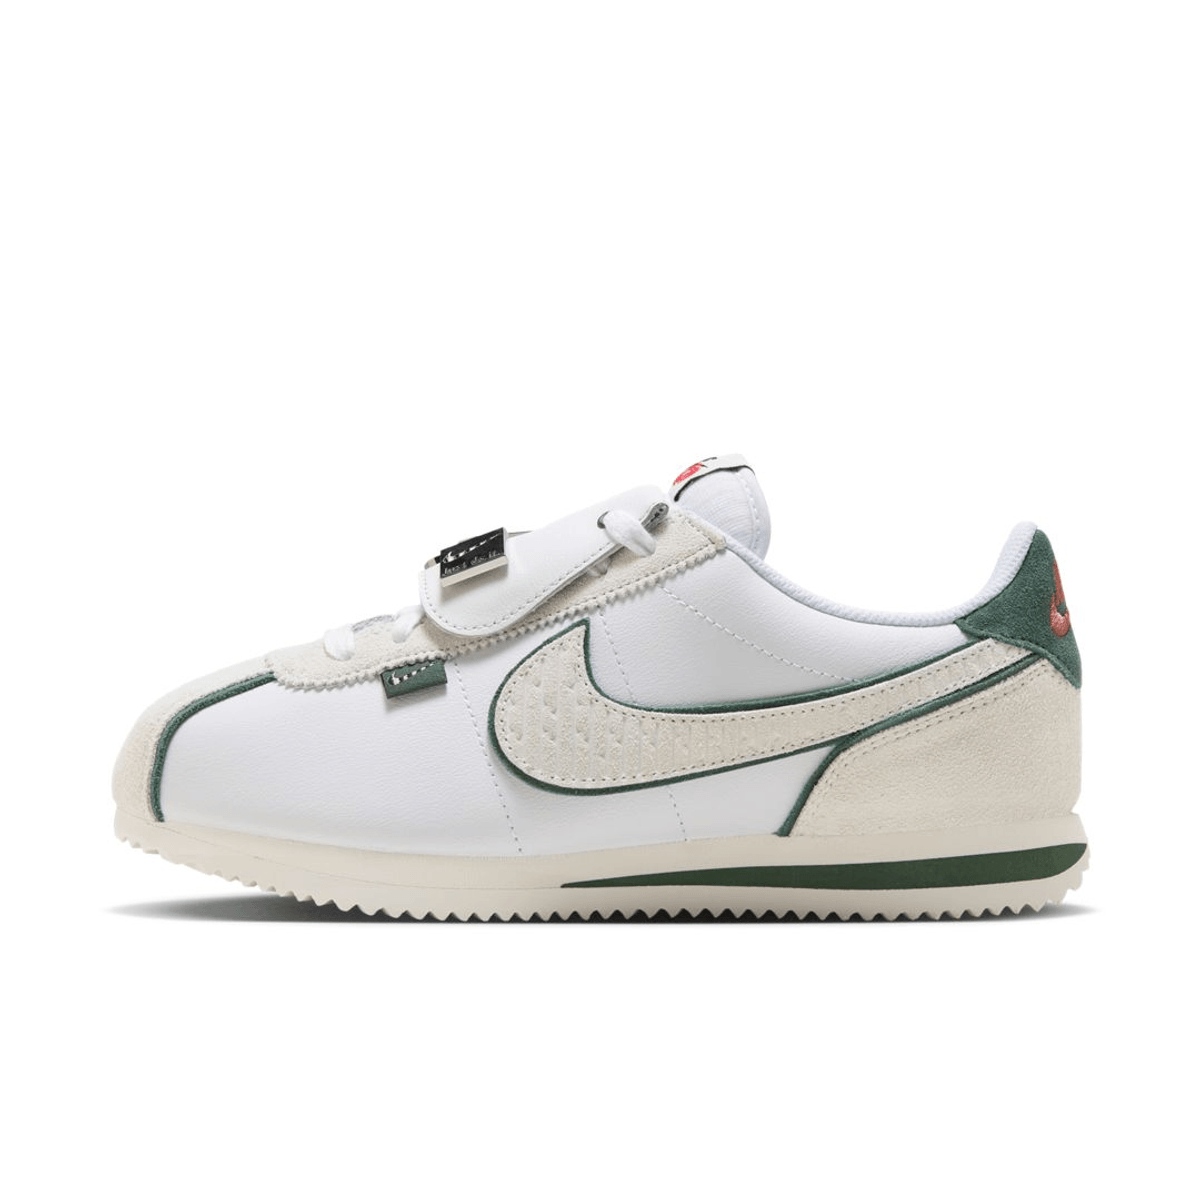 "All Petals United" Pack Joins the Nike Cortez